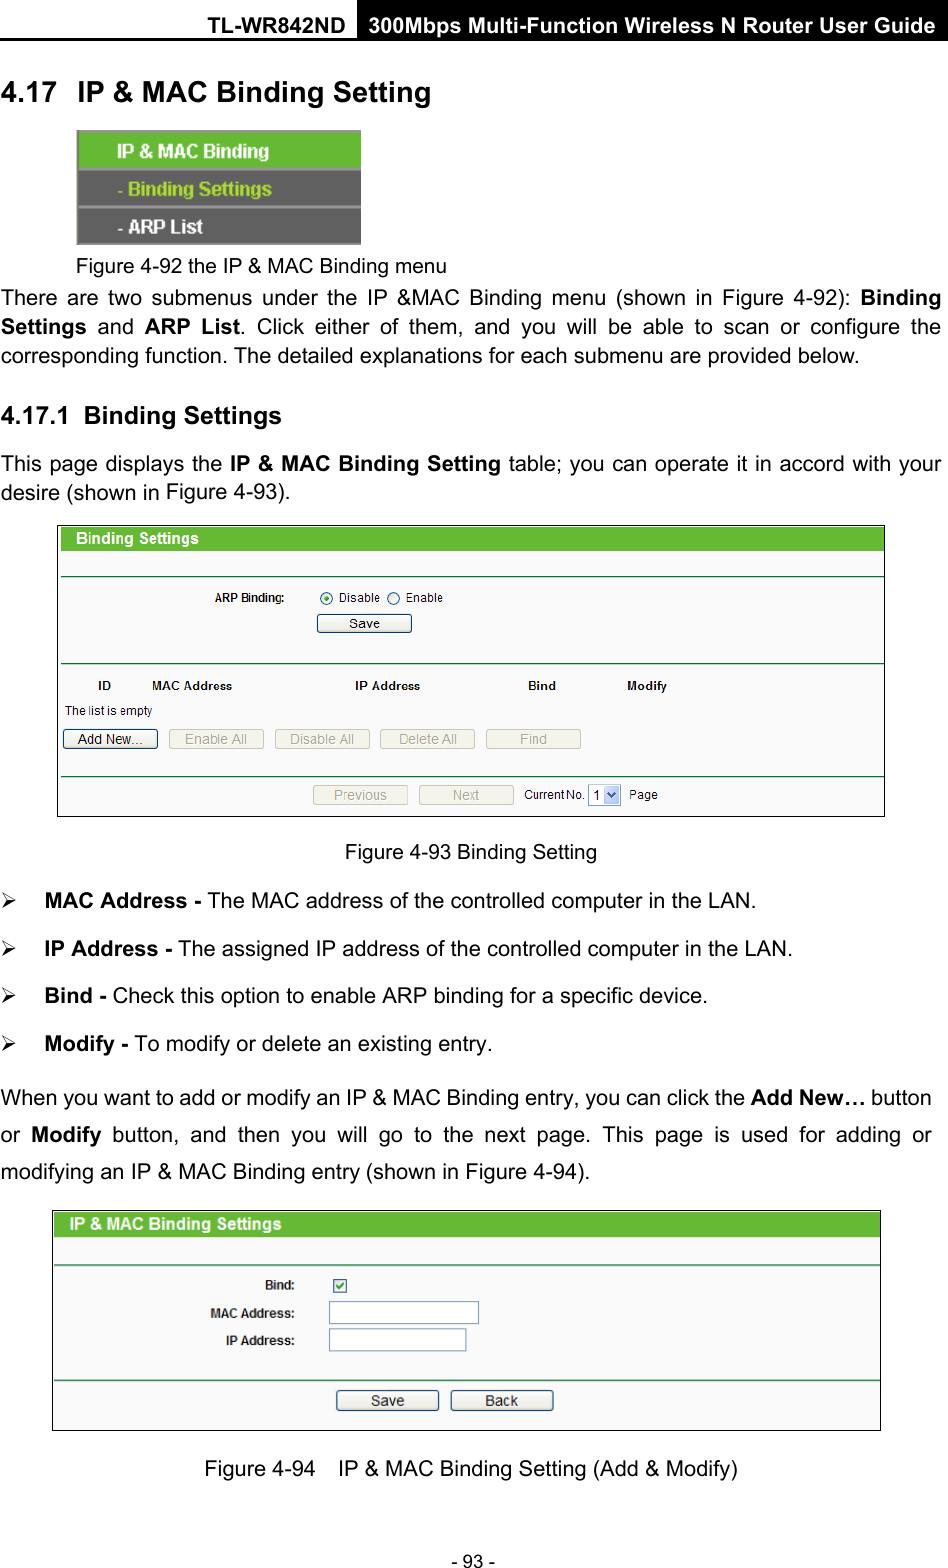 TL-WR842ND 300Mbps Multi-Function Wireless N Router User Guide  - 93 - 4.17 IP &amp; MAC Binding Setting  Figure 4-92 the IP &amp; MAC Binding menu There are two submenus under the IP &amp;MAC Binding menu (shown in Figure  4-92):  Binding Settings  and ARP List. Click either of them, and you will be able to scan or configure the corresponding function. The detailed explanations for each submenu are provided below. 4.17.1 Binding Settings This page displays the IP &amp; MAC Binding Setting table; you can operate it in accord with your desire (shown in Figure 4-93).    Figure 4-93 Binding Setting  MAC Address - The MAC address of the controlled computer in the LAN.    IP Address - The assigned IP address of the controlled computer in the LAN.    Bind - Check this option to enable ARP binding for a specific device.    Modify - To modify or delete an existing entry.   When you want to add or modify an IP &amp; MAC Binding entry, you can click the Add New… button or  Modify button, and then you will go to the next page. This page is used for adding or modifying an IP &amp; MAC Binding entry (shown in Figure 4-94).      Figure 4-94  IP &amp; MAC Binding Setting (Add &amp; Modify) 